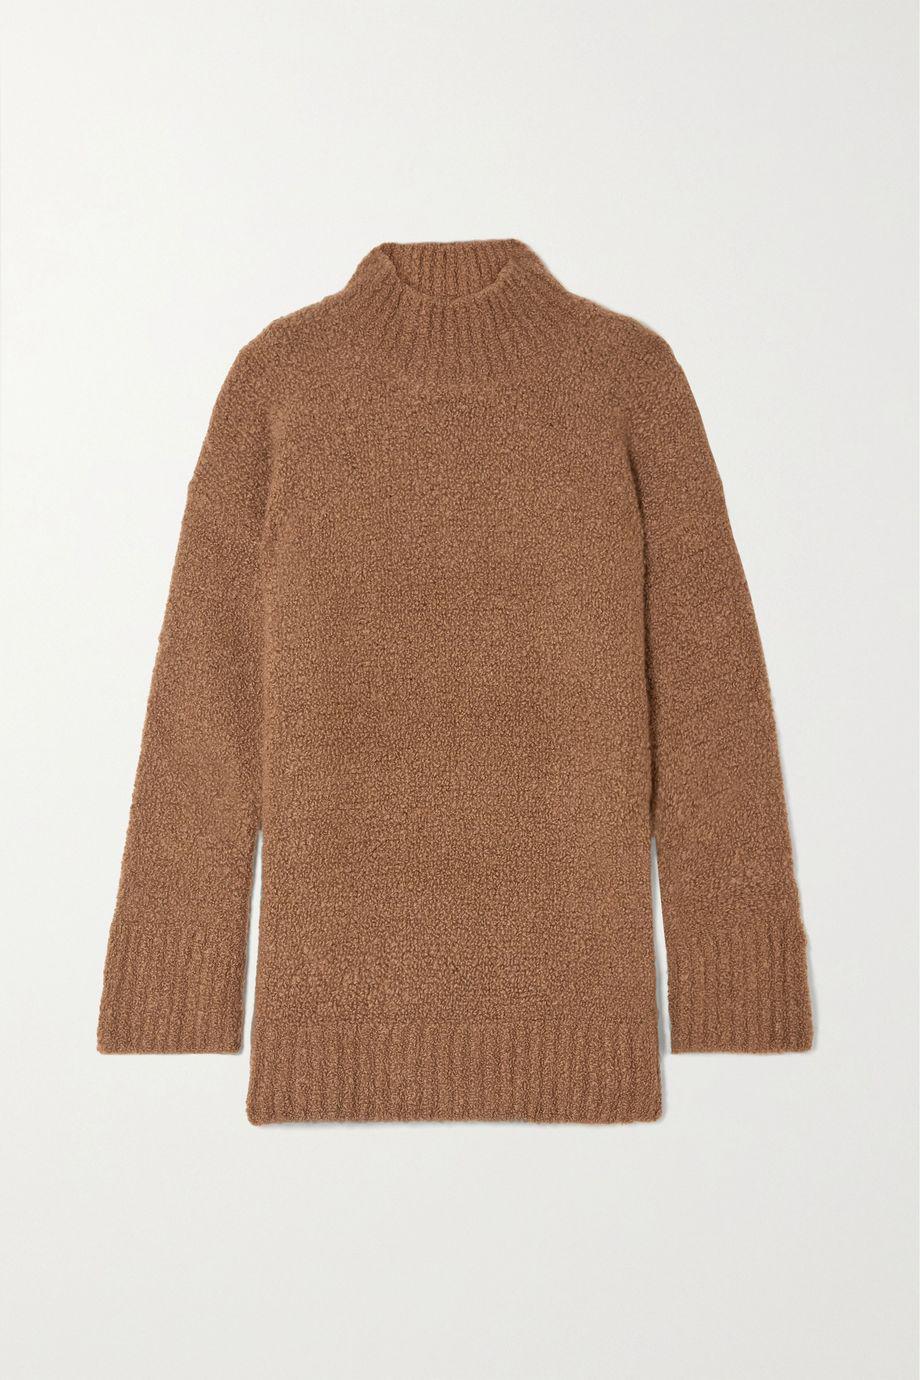 + NET SUSTAIN recycled cashmere-bouclé turtleneck sweater by CASASOLA